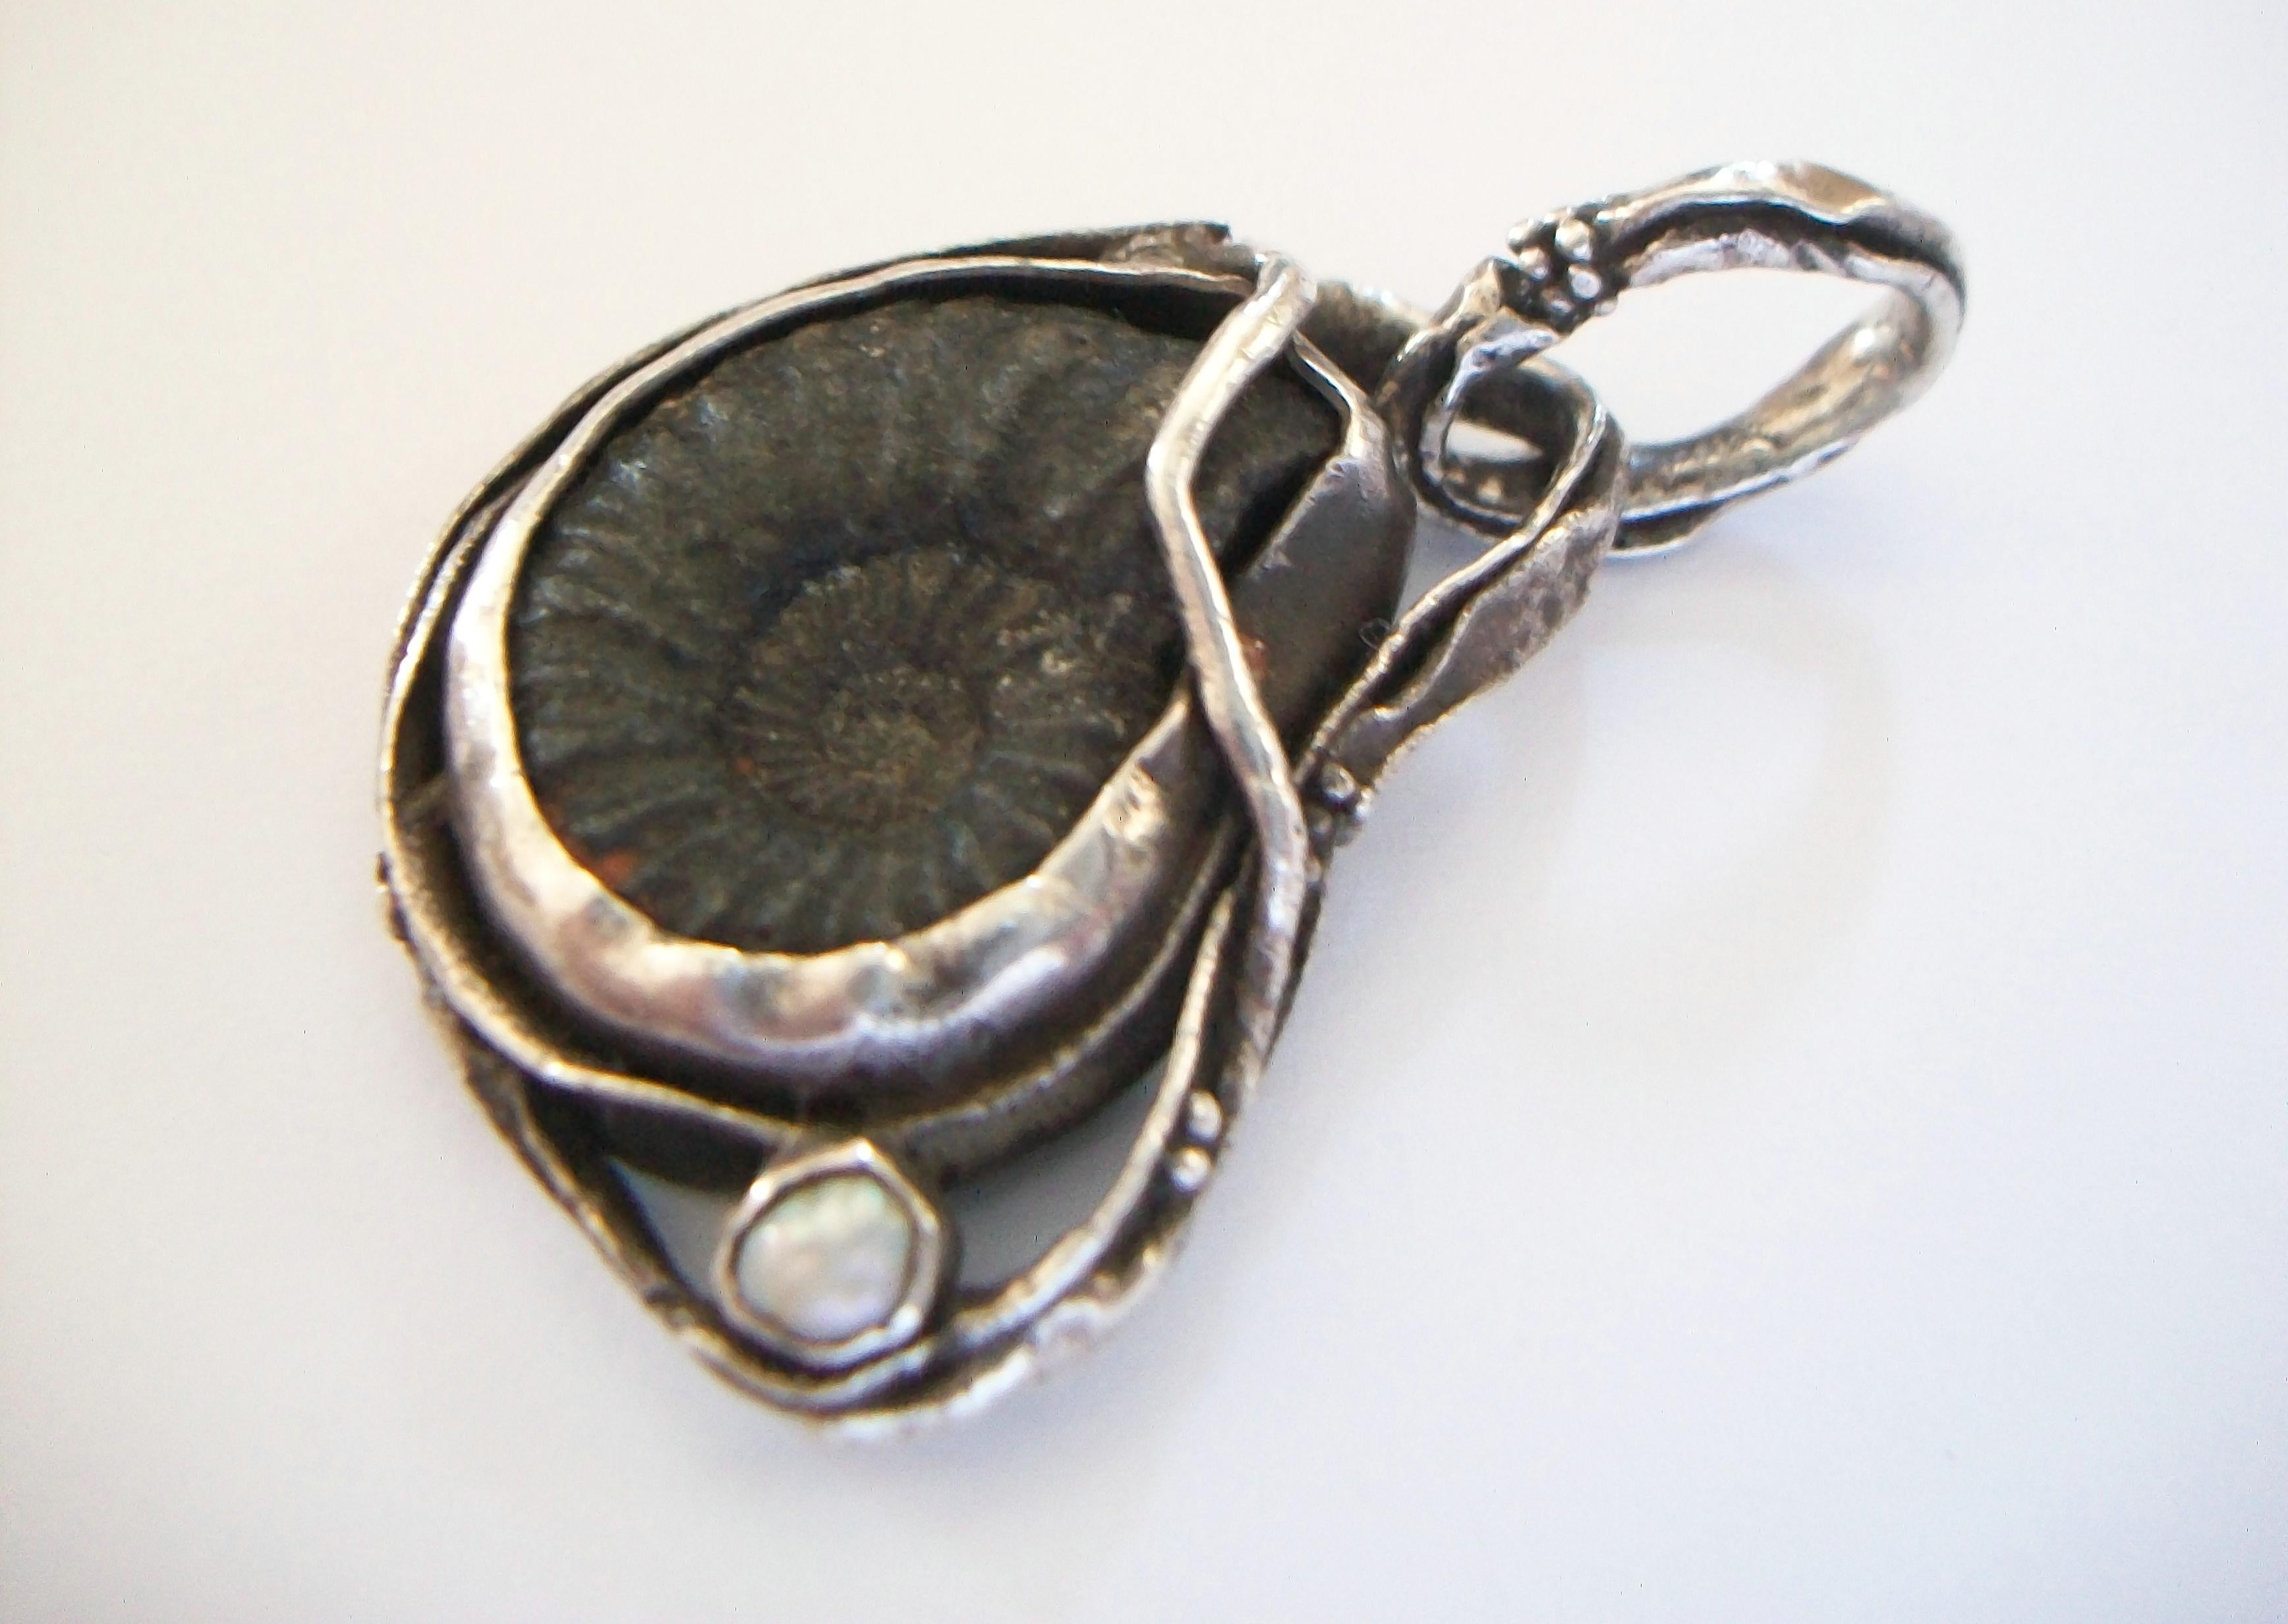 Art Nouveau style Pyritized Ammonite Fossil & Cultured Baroque Pearl pendant - organically set in white metal (unknown content) - hand made - large bale - warm aged patina - unsigned - 20th century.

Excellent vintage condition - all original -